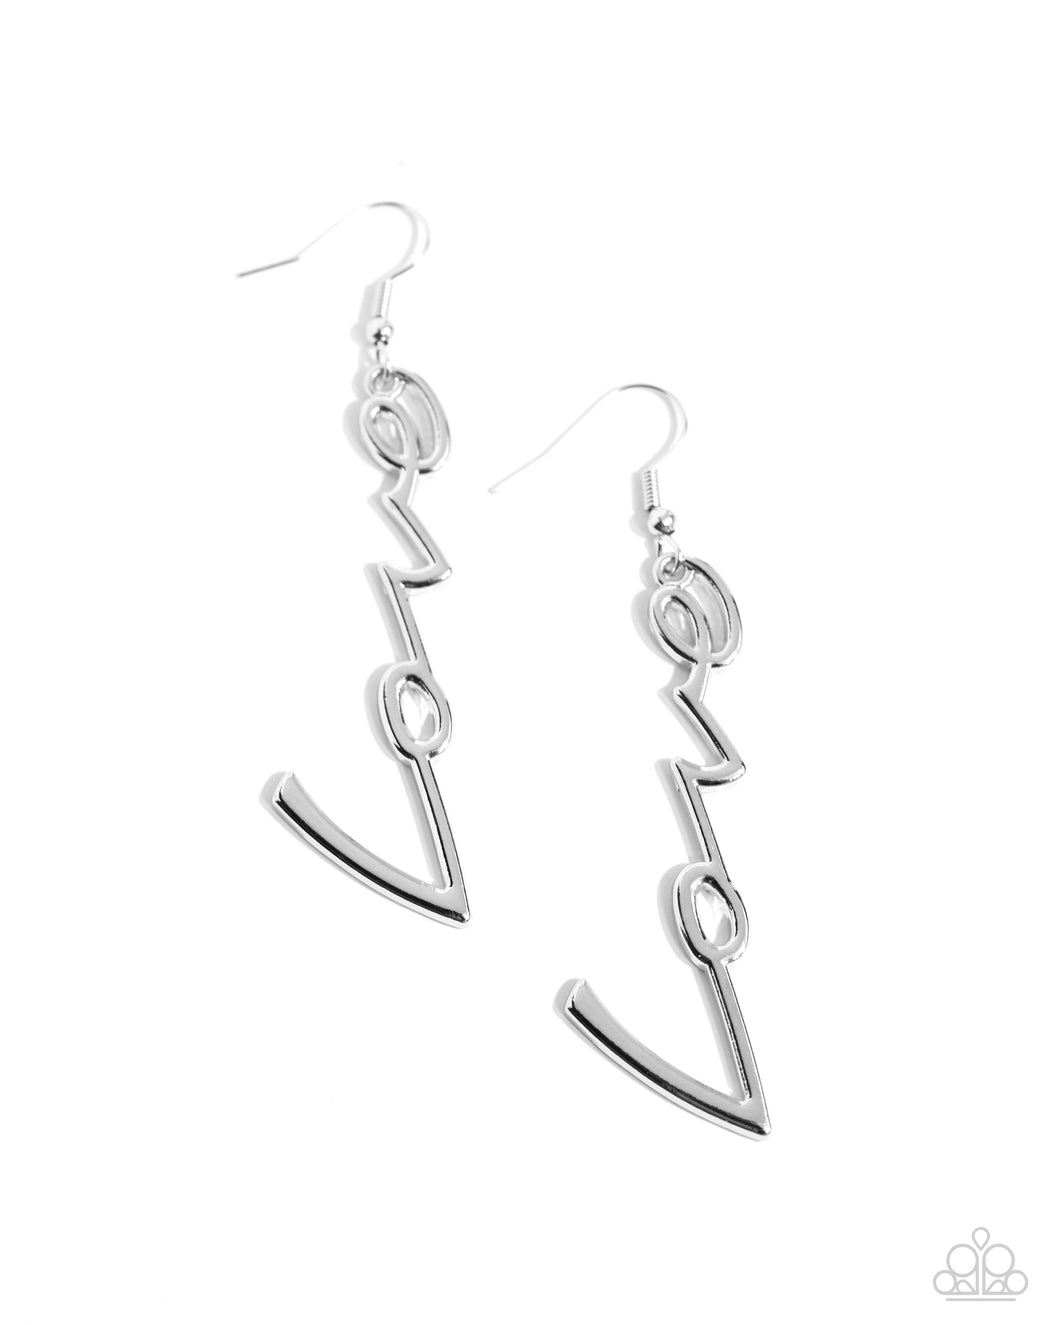 Light-Catching Letters - Silver Earring